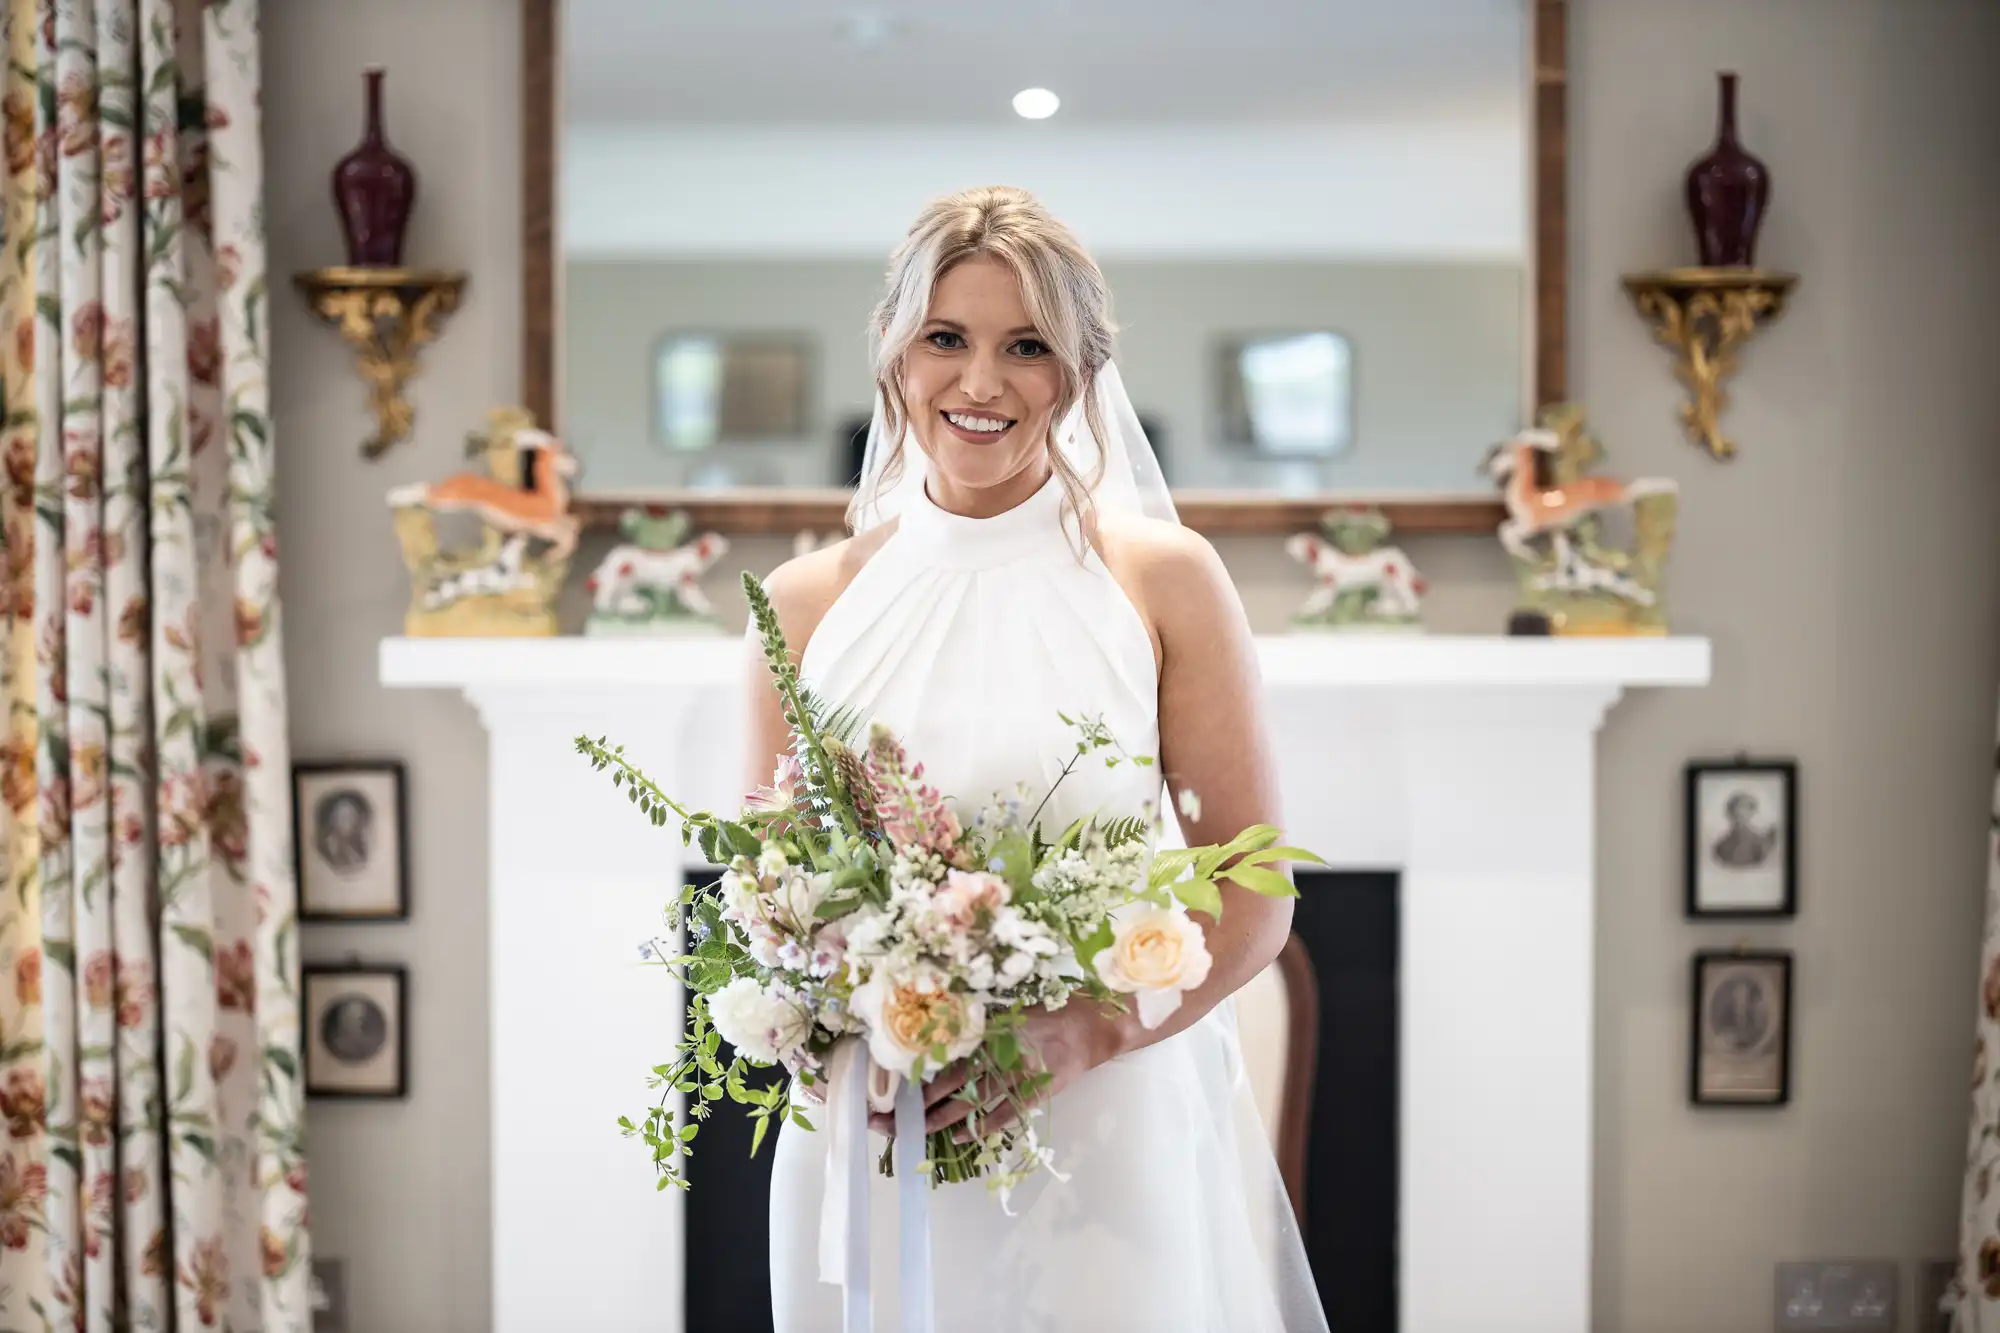 A bride smiling in a white dress and veil, holding a bouquet, standing in a room with elegant decor.